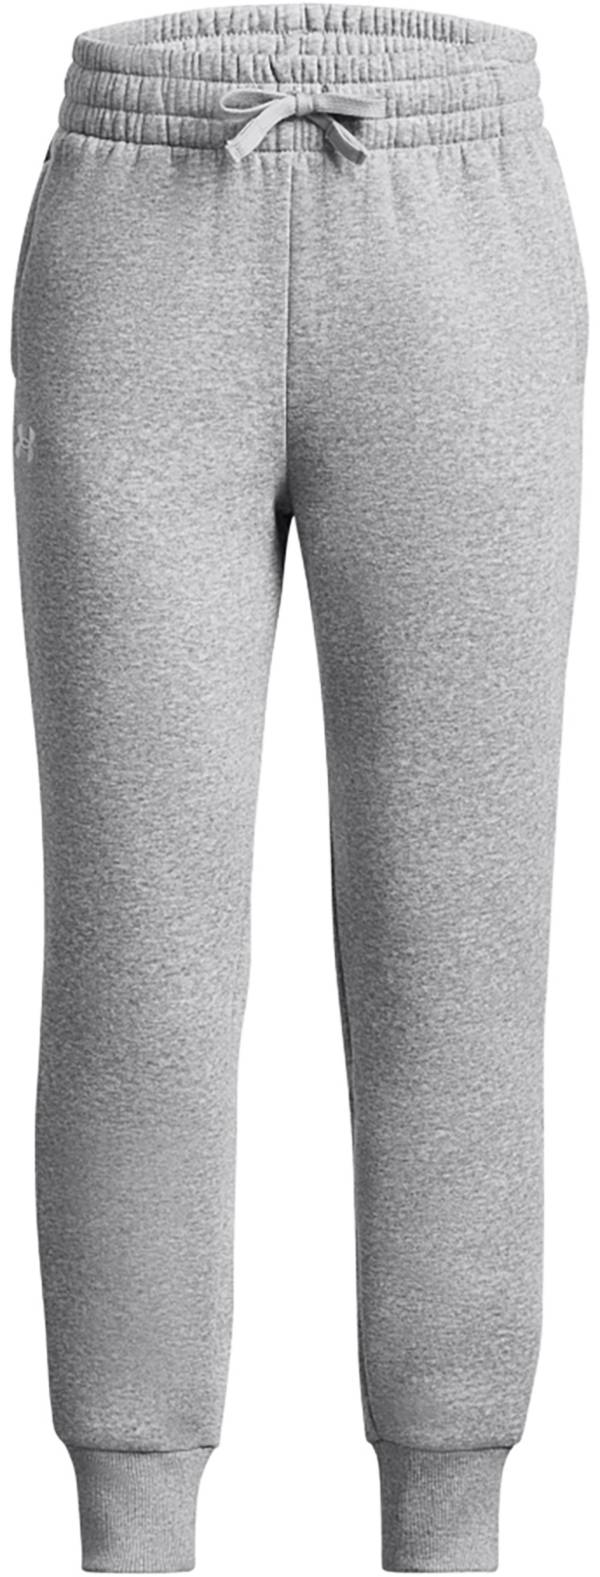 Horse Lover Joggers for Women Sweatpants for Teen Girls Horses Fleece  Joggers X-Small Gray 